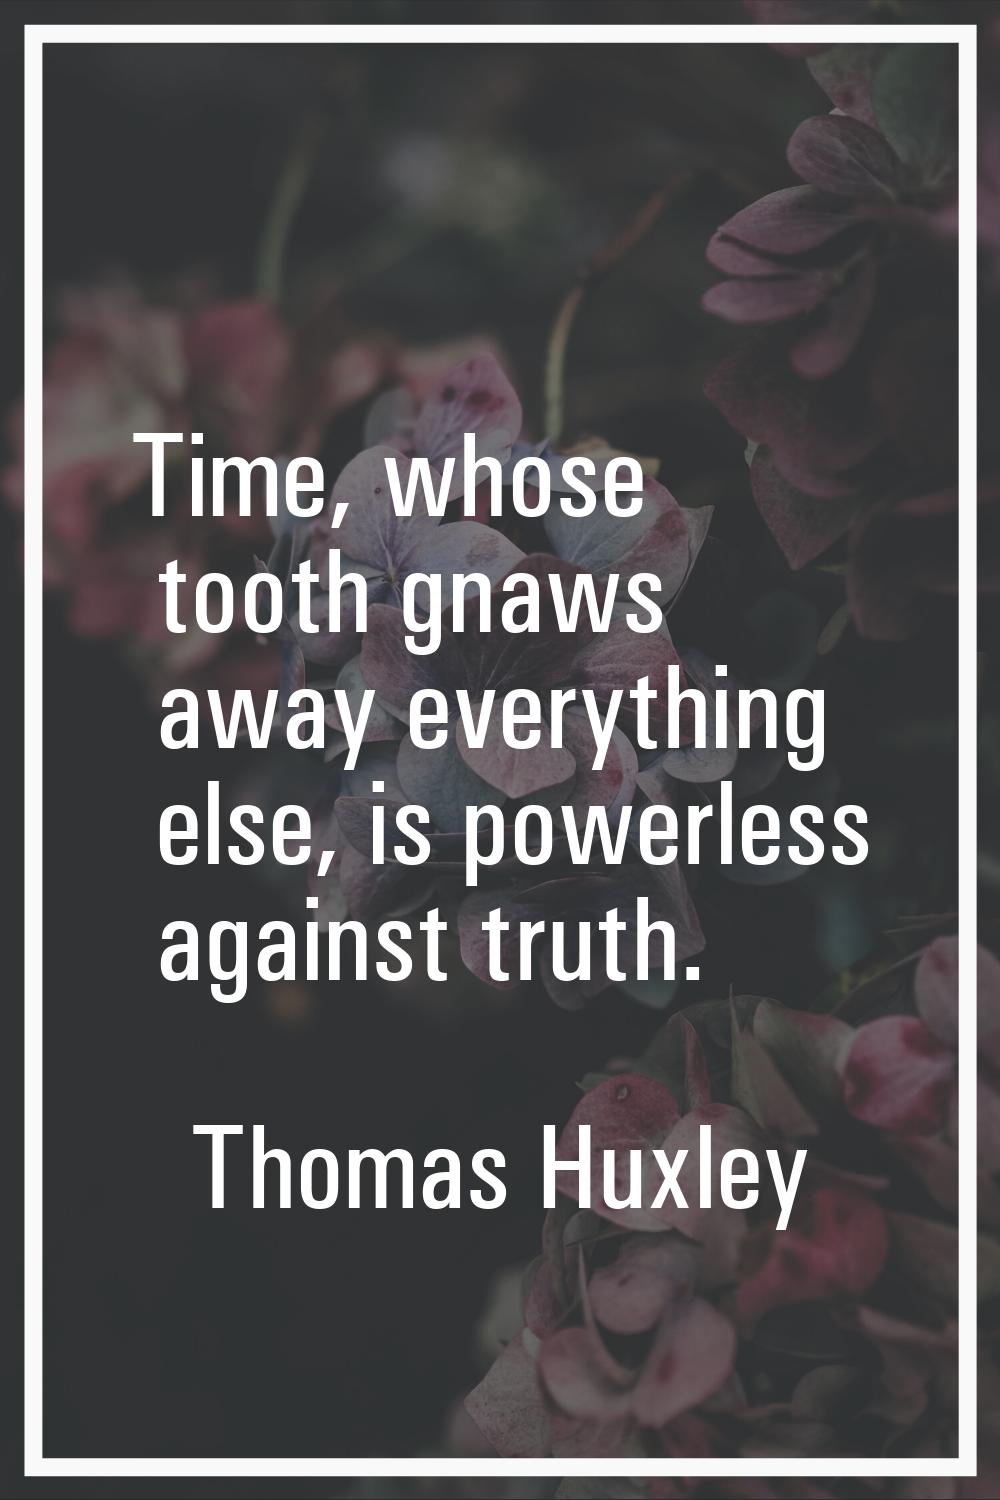 Time, whose tooth gnaws away everything else, is powerless against truth.